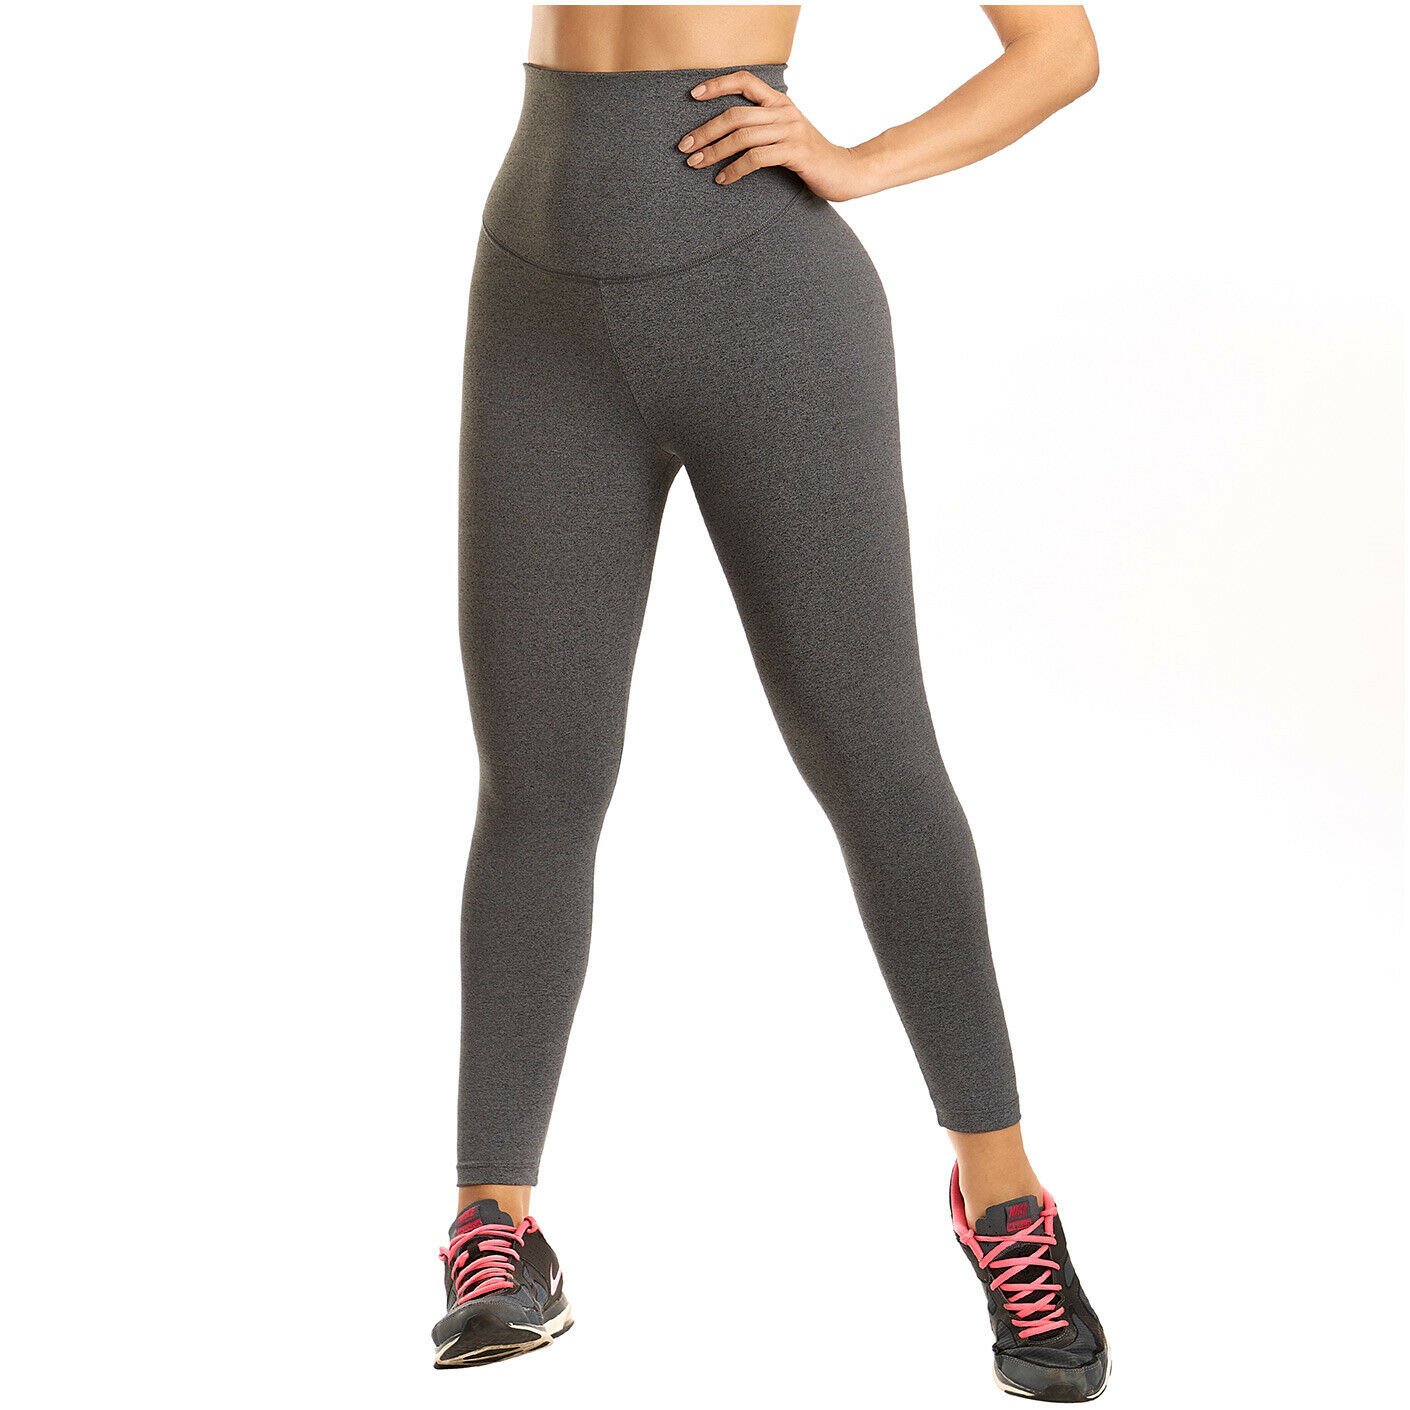 High Waist Tummy Control Buttlift Slimming Leggings Colombianos LT.ROSE  21840